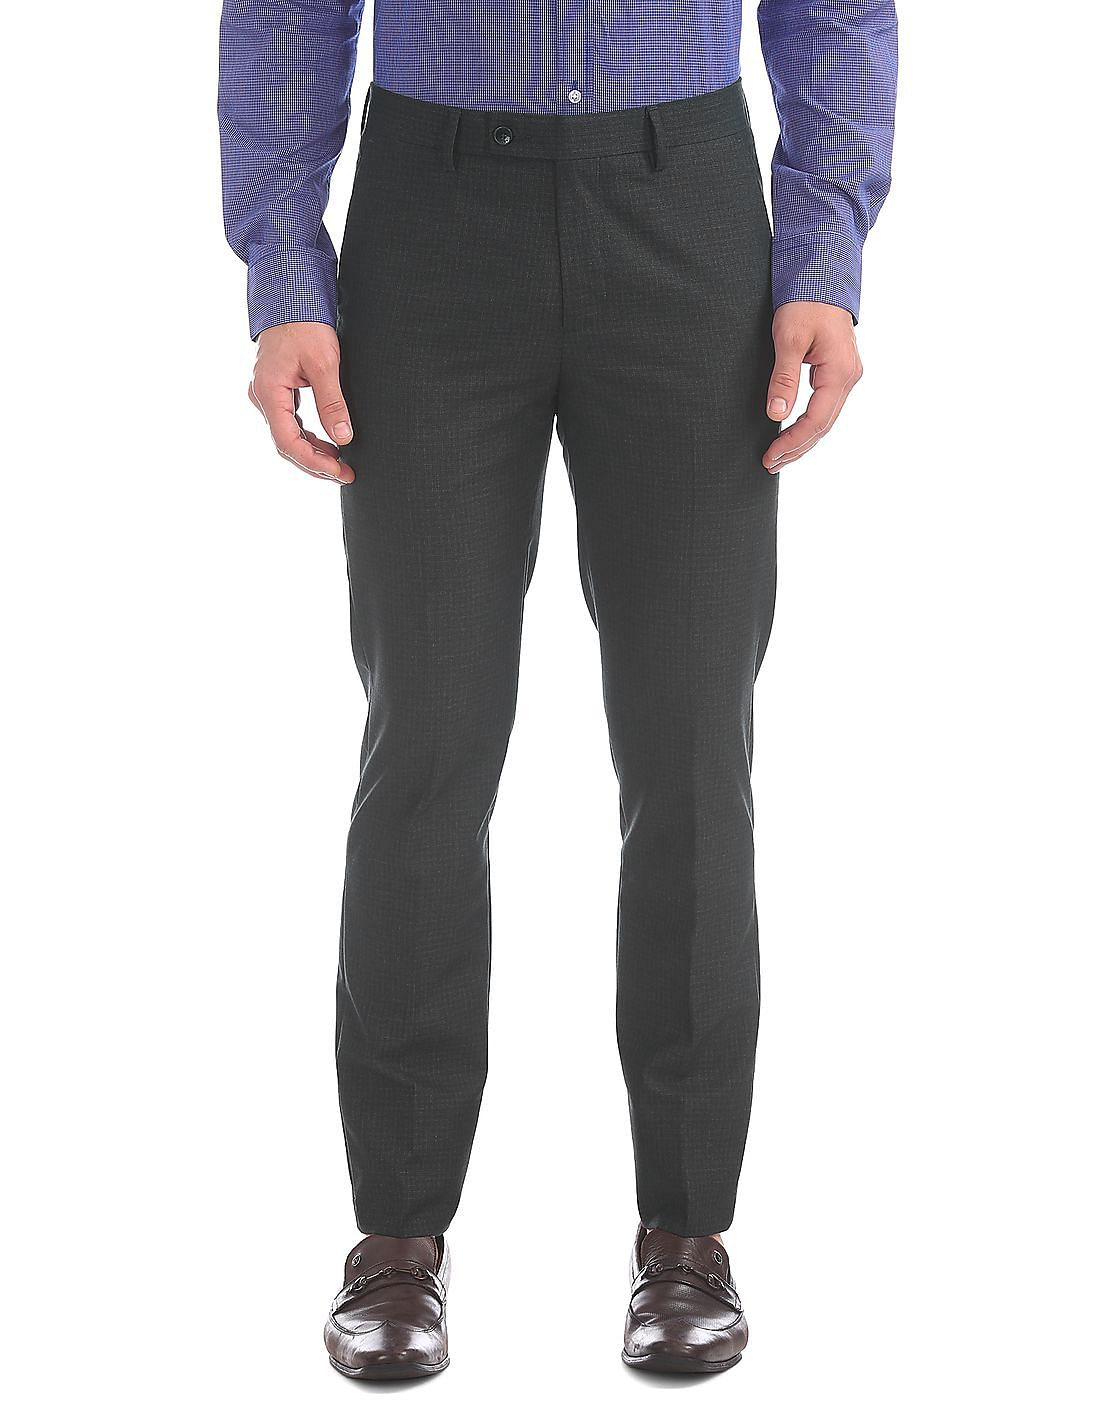 Buy Men Slim Fit Patterned Weave Trousers online at NNNOW.com